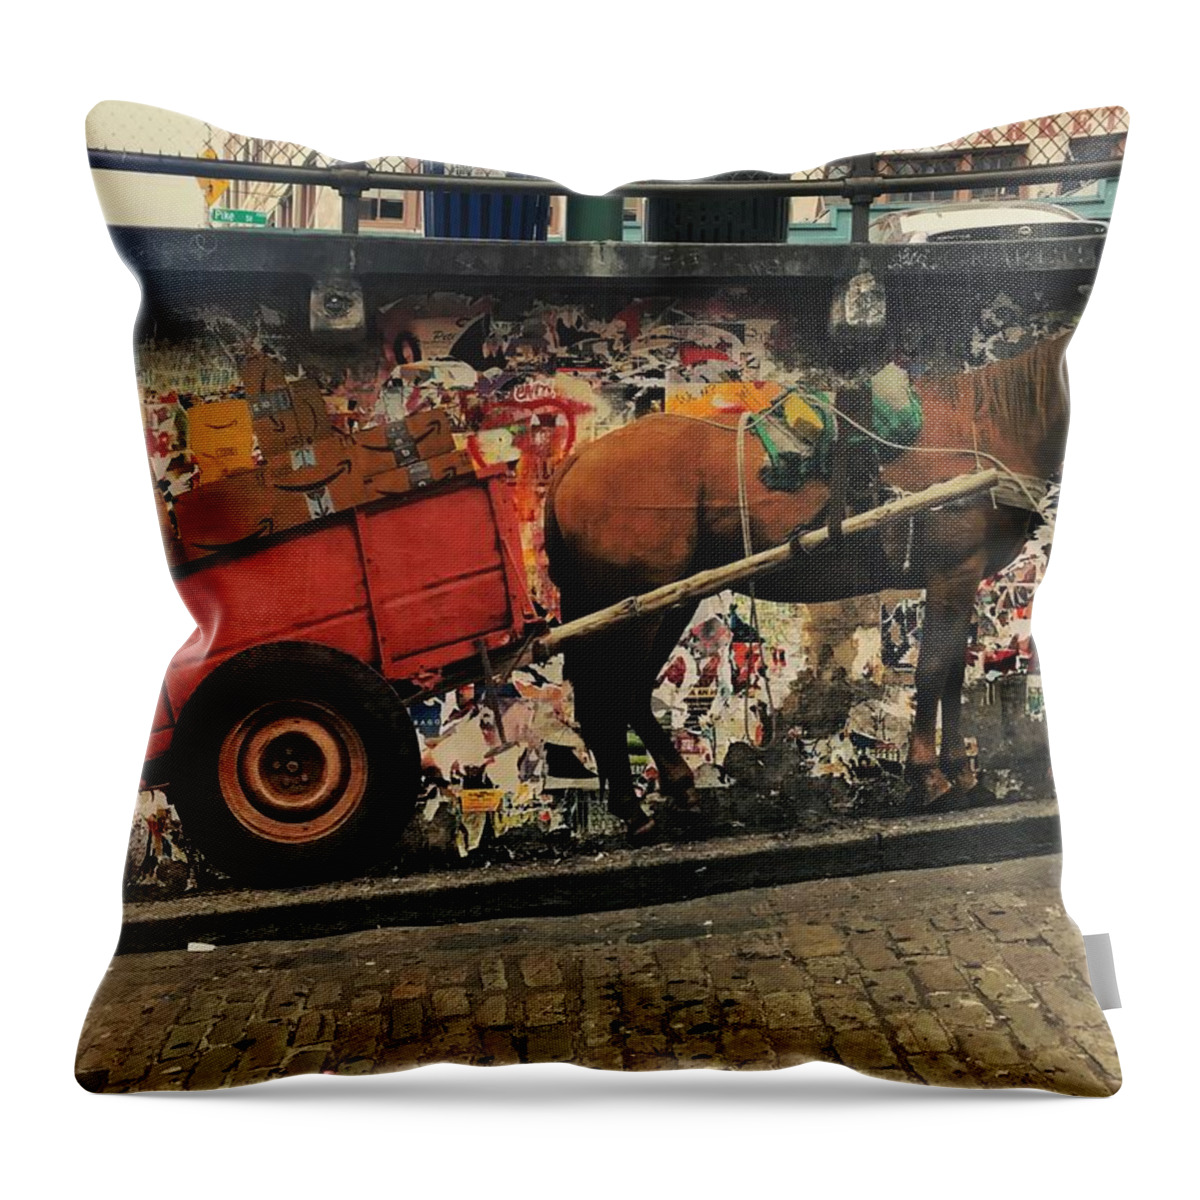 Mural Throw Pillow featuring the photograph Realistic Horse and Cart Mural by Jerry Abbott